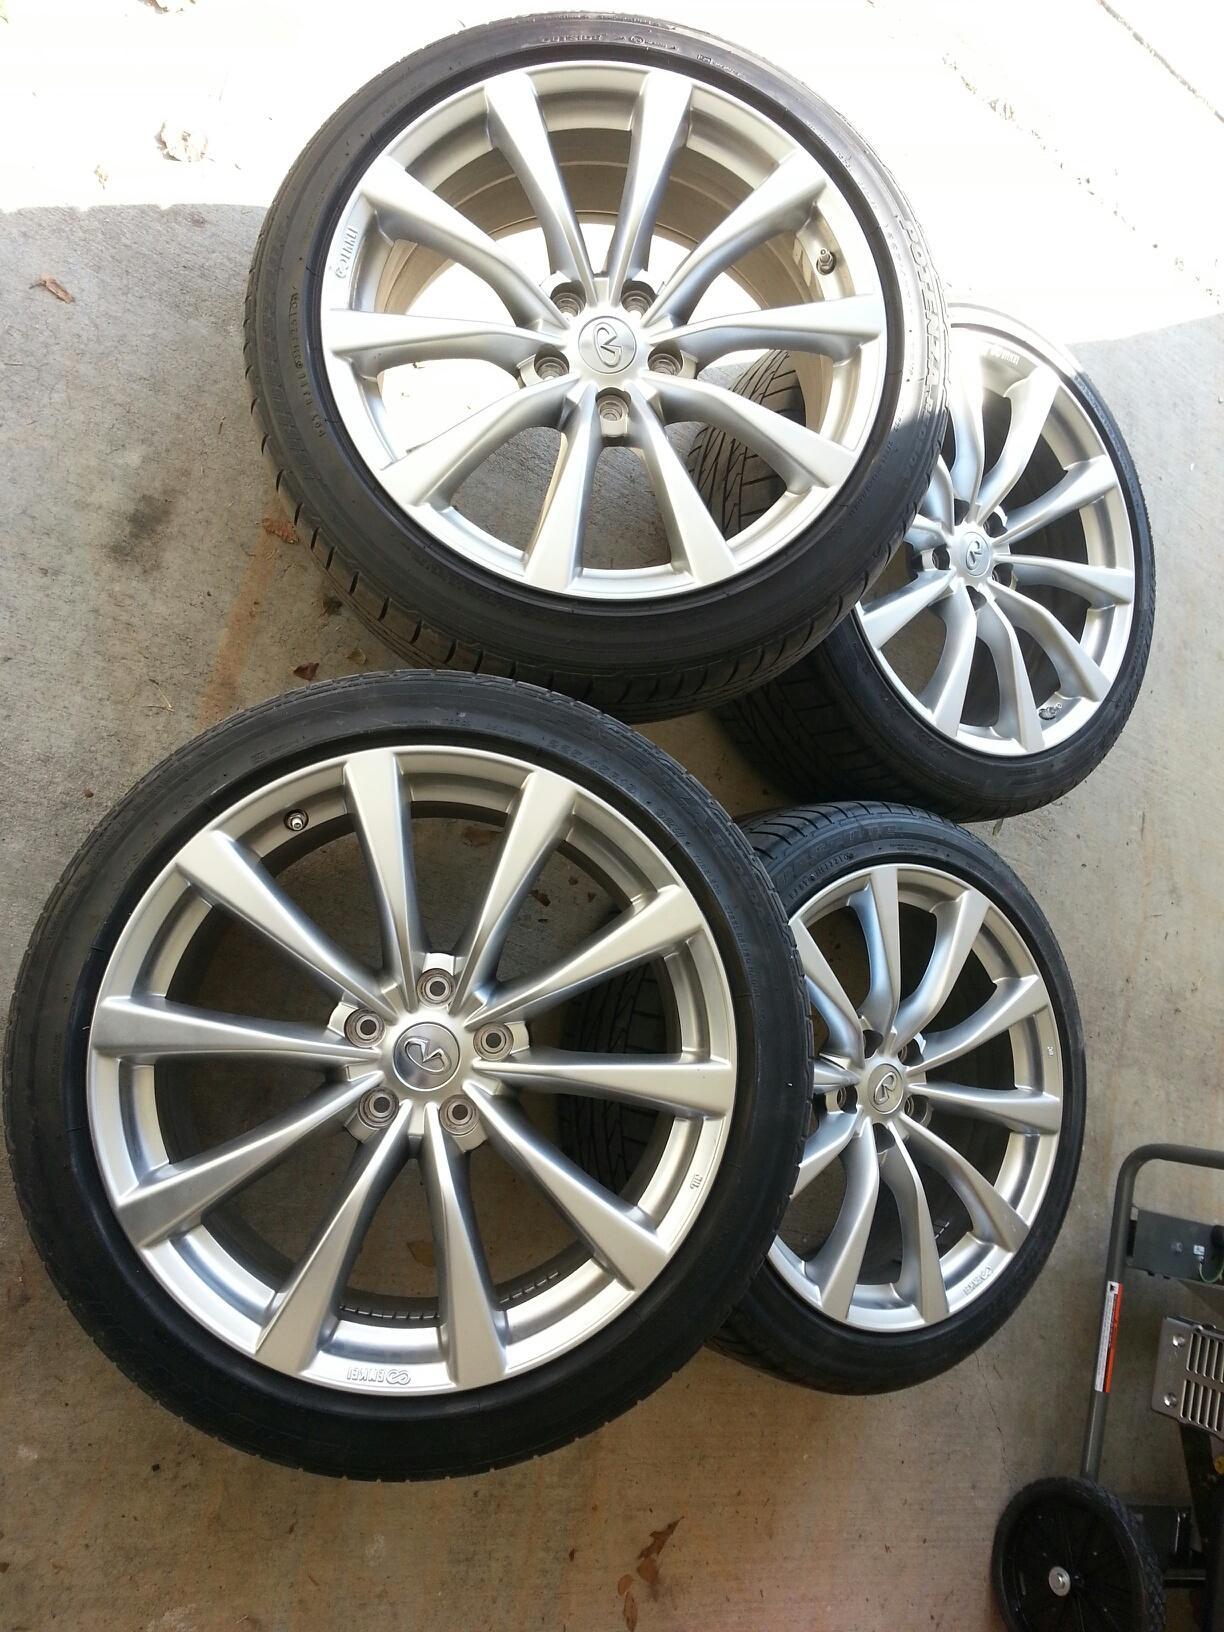 For Sale 19 inch coupe wheels/tires - MyG37